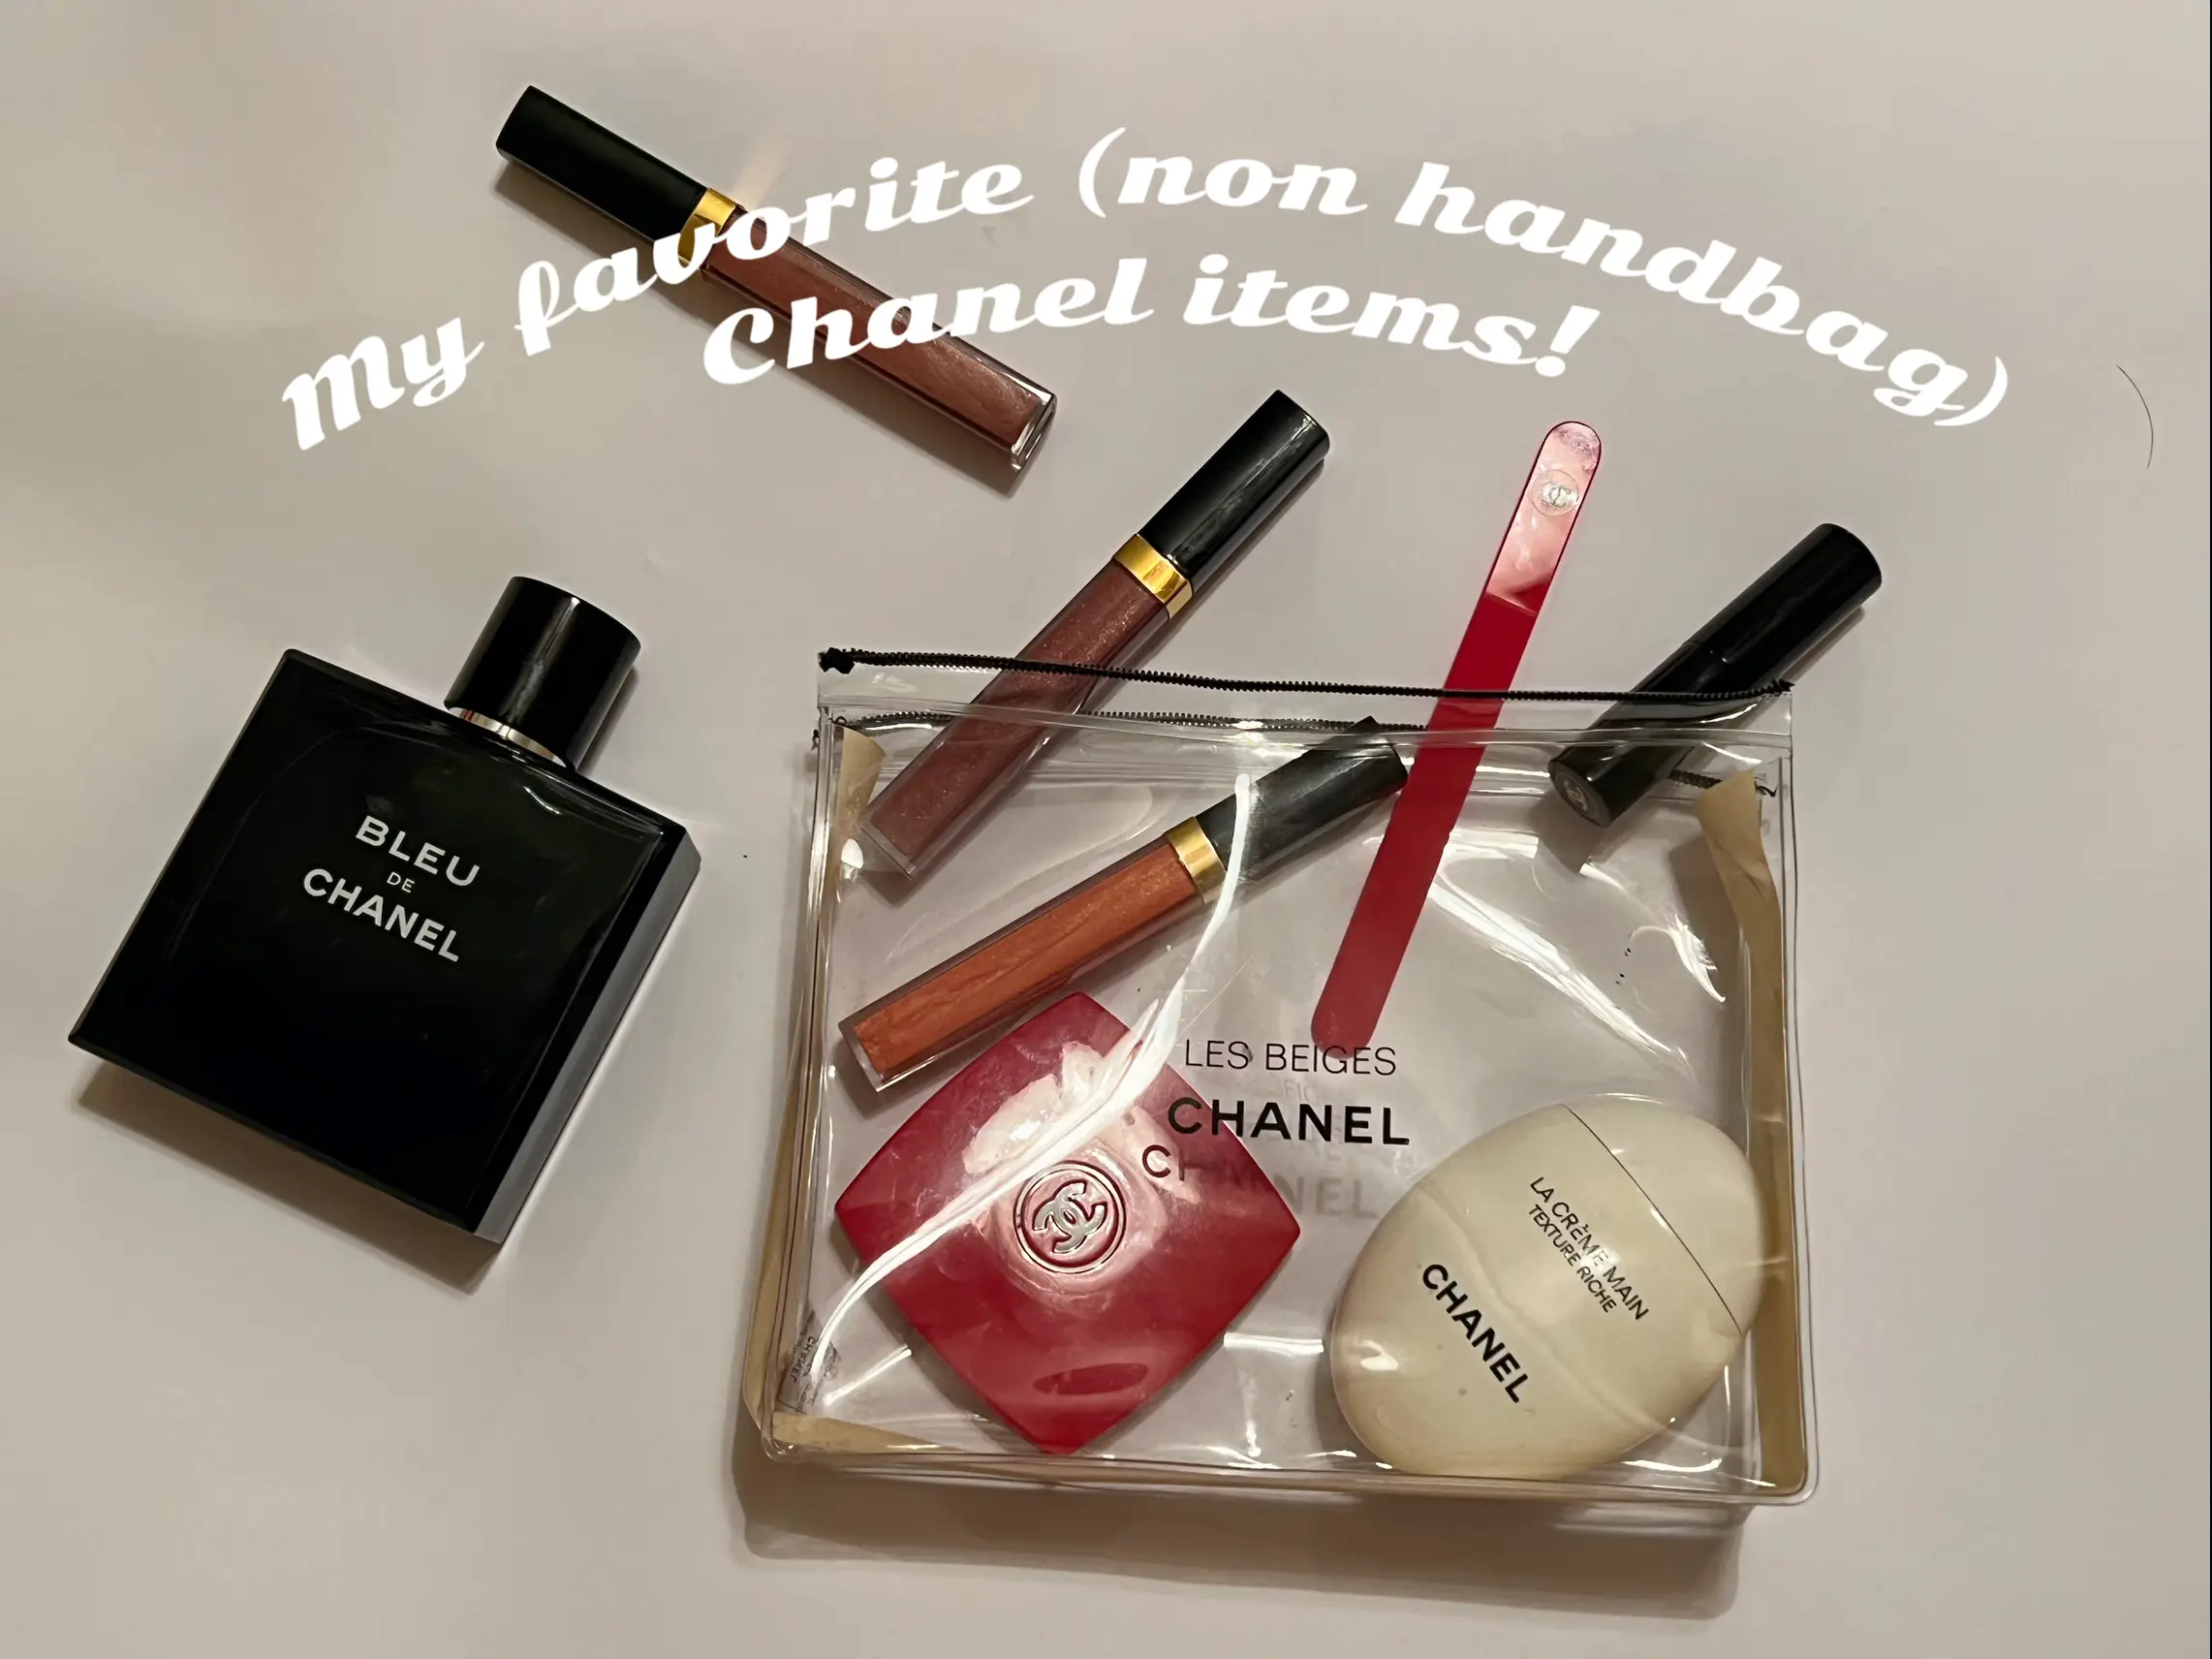 Chanel 5 In 1 Gift Set Makeup Perfume Box